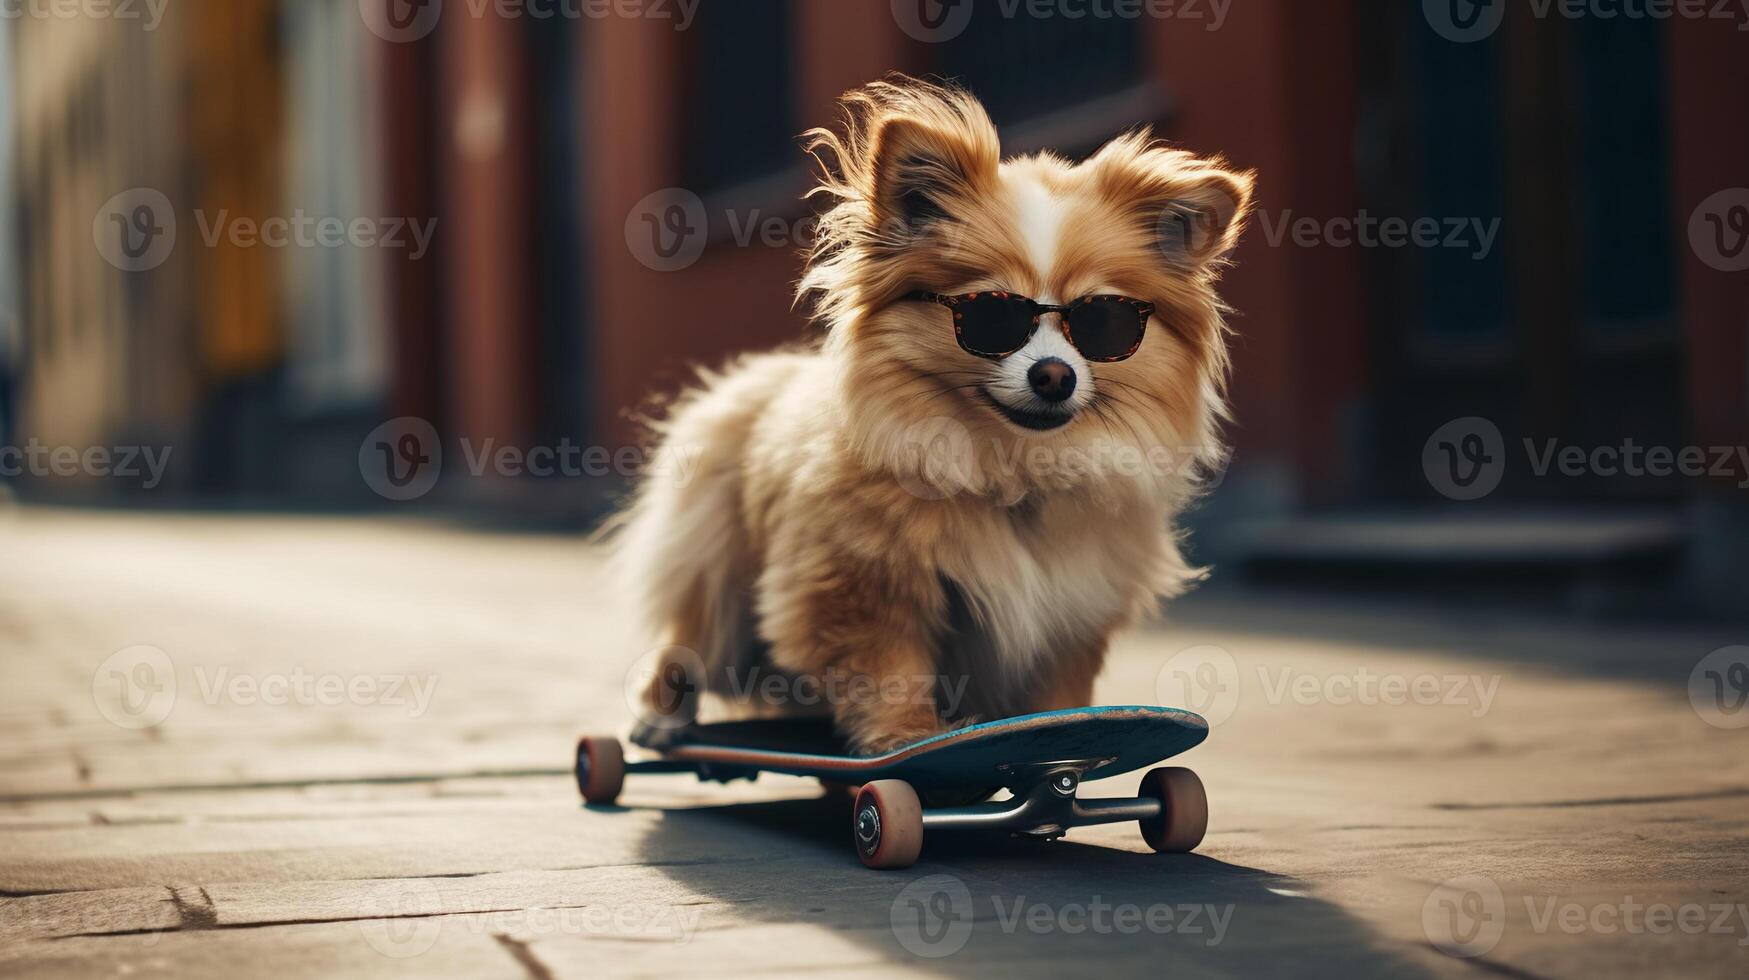 Cool red ginger fluffy dog in sunglasses riding a skateboard down the street funny pets photo